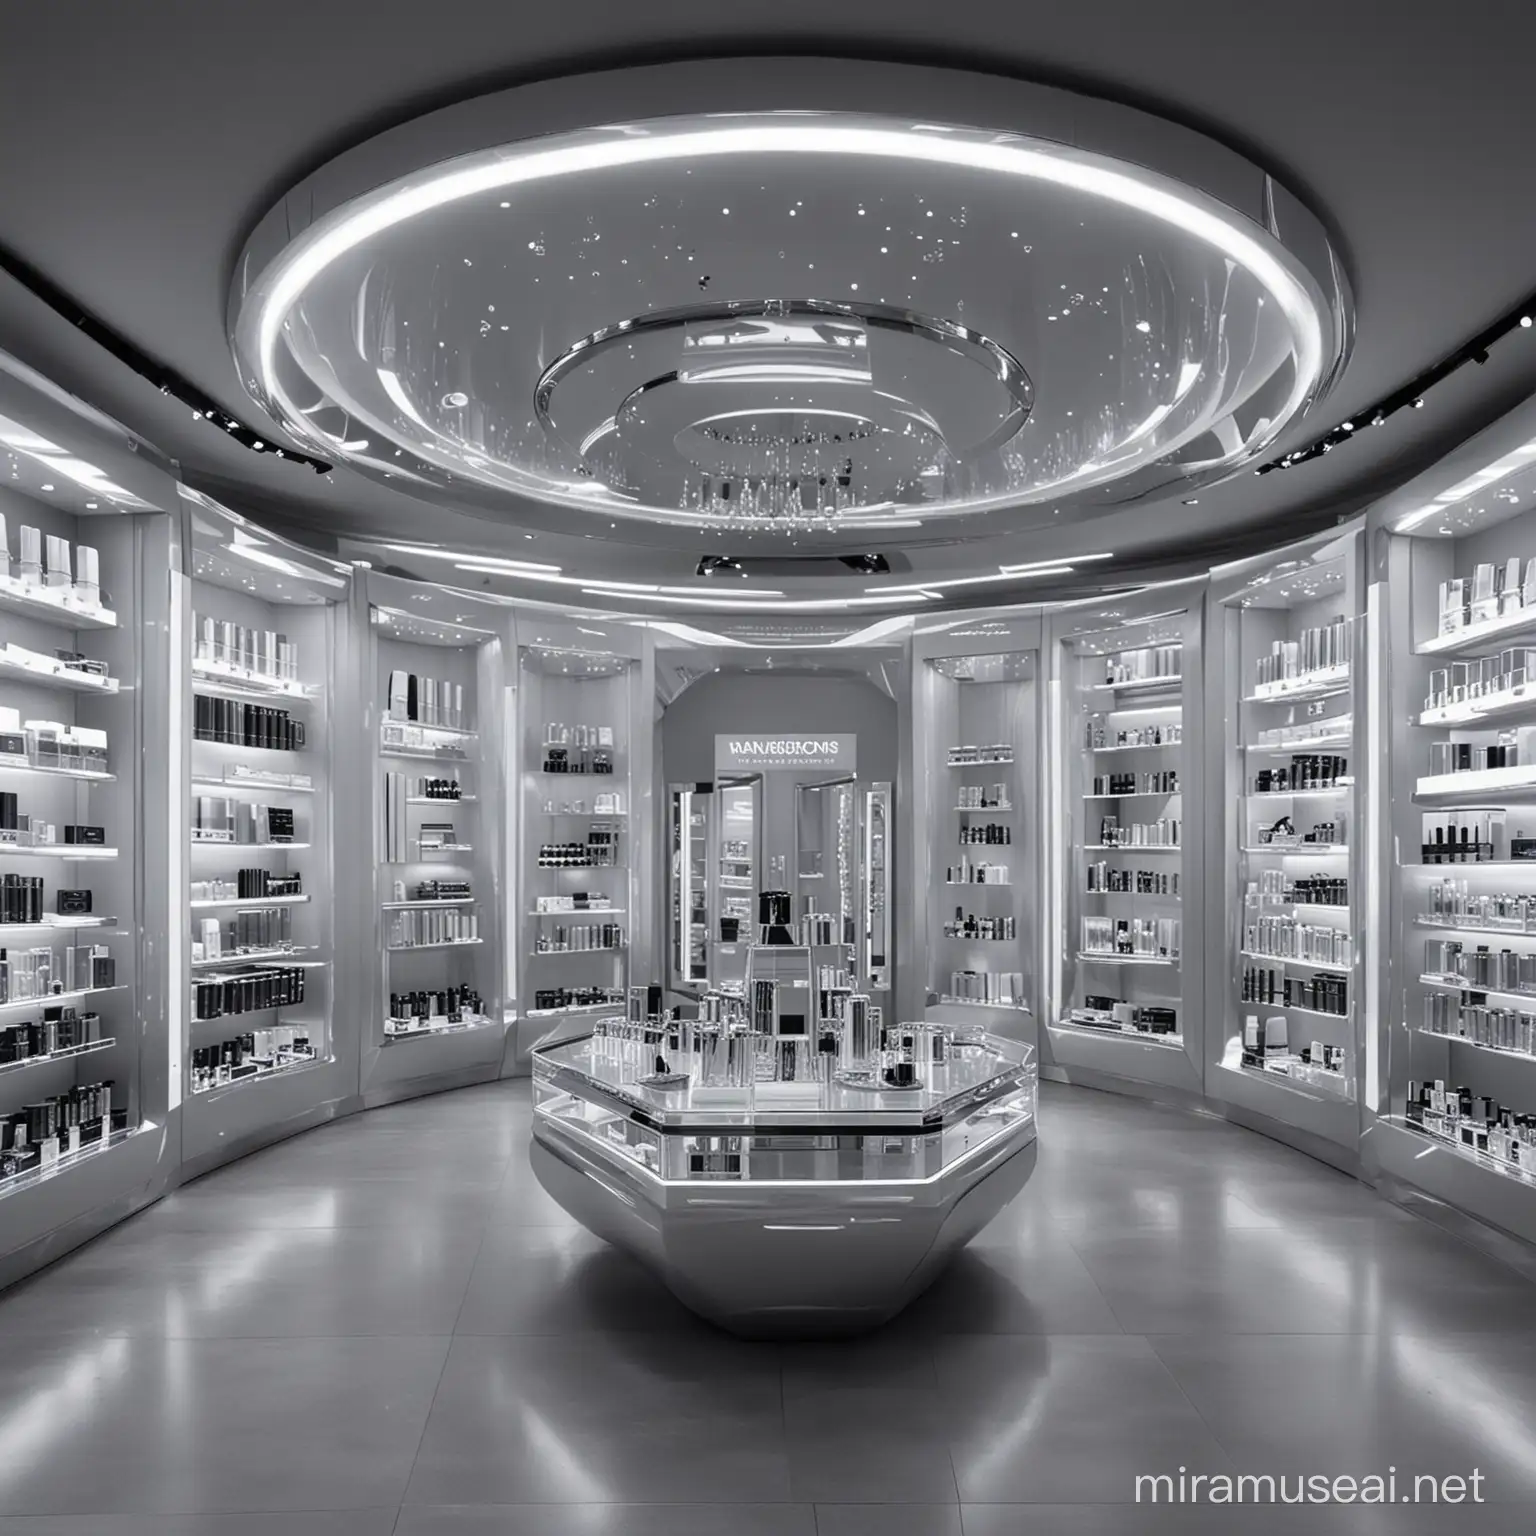 Futuristic perfume shope which could not be seen any one before this